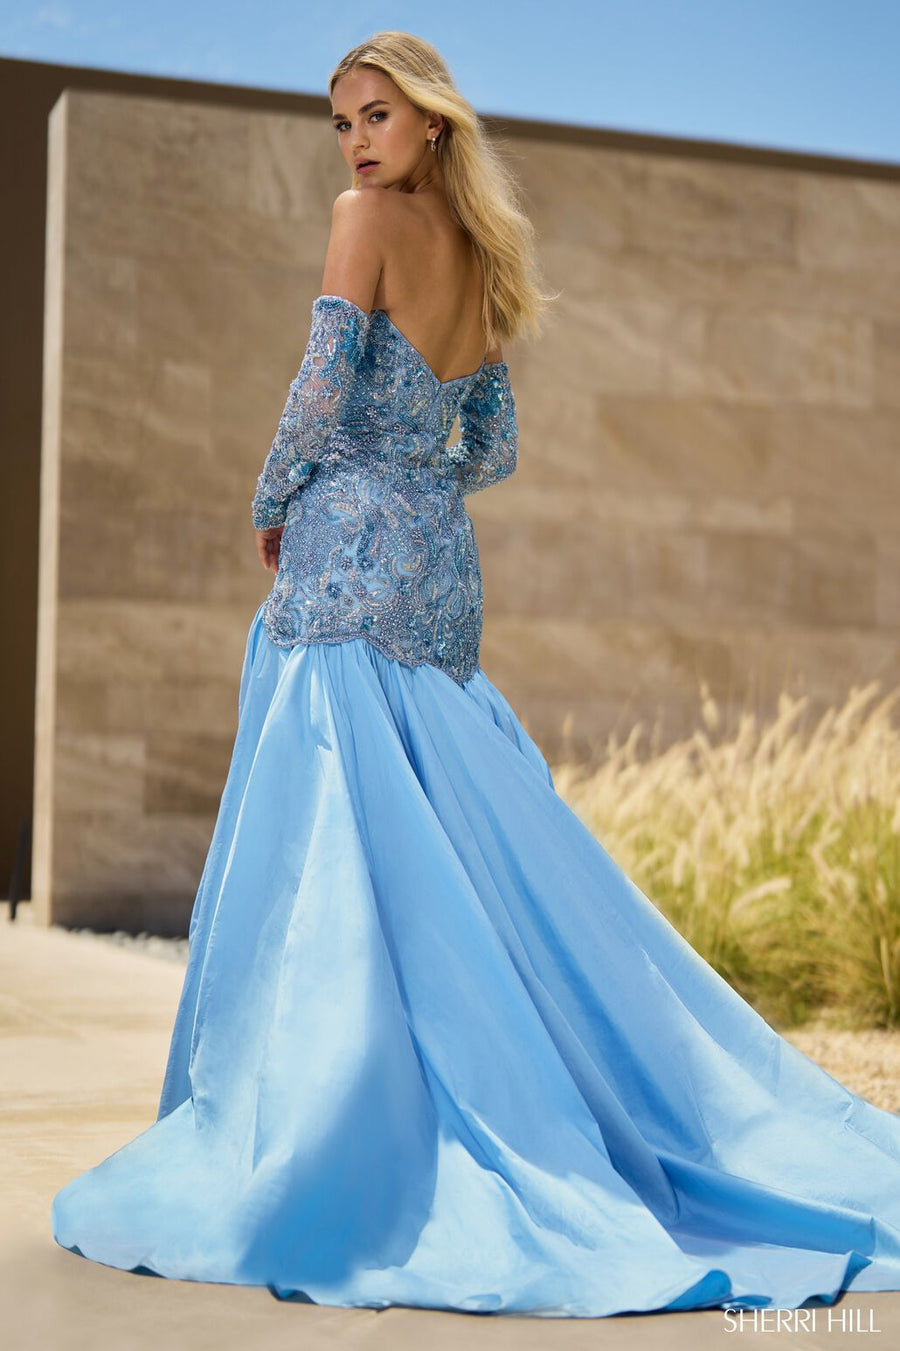 Lace Prom Dresses - Formal Approach